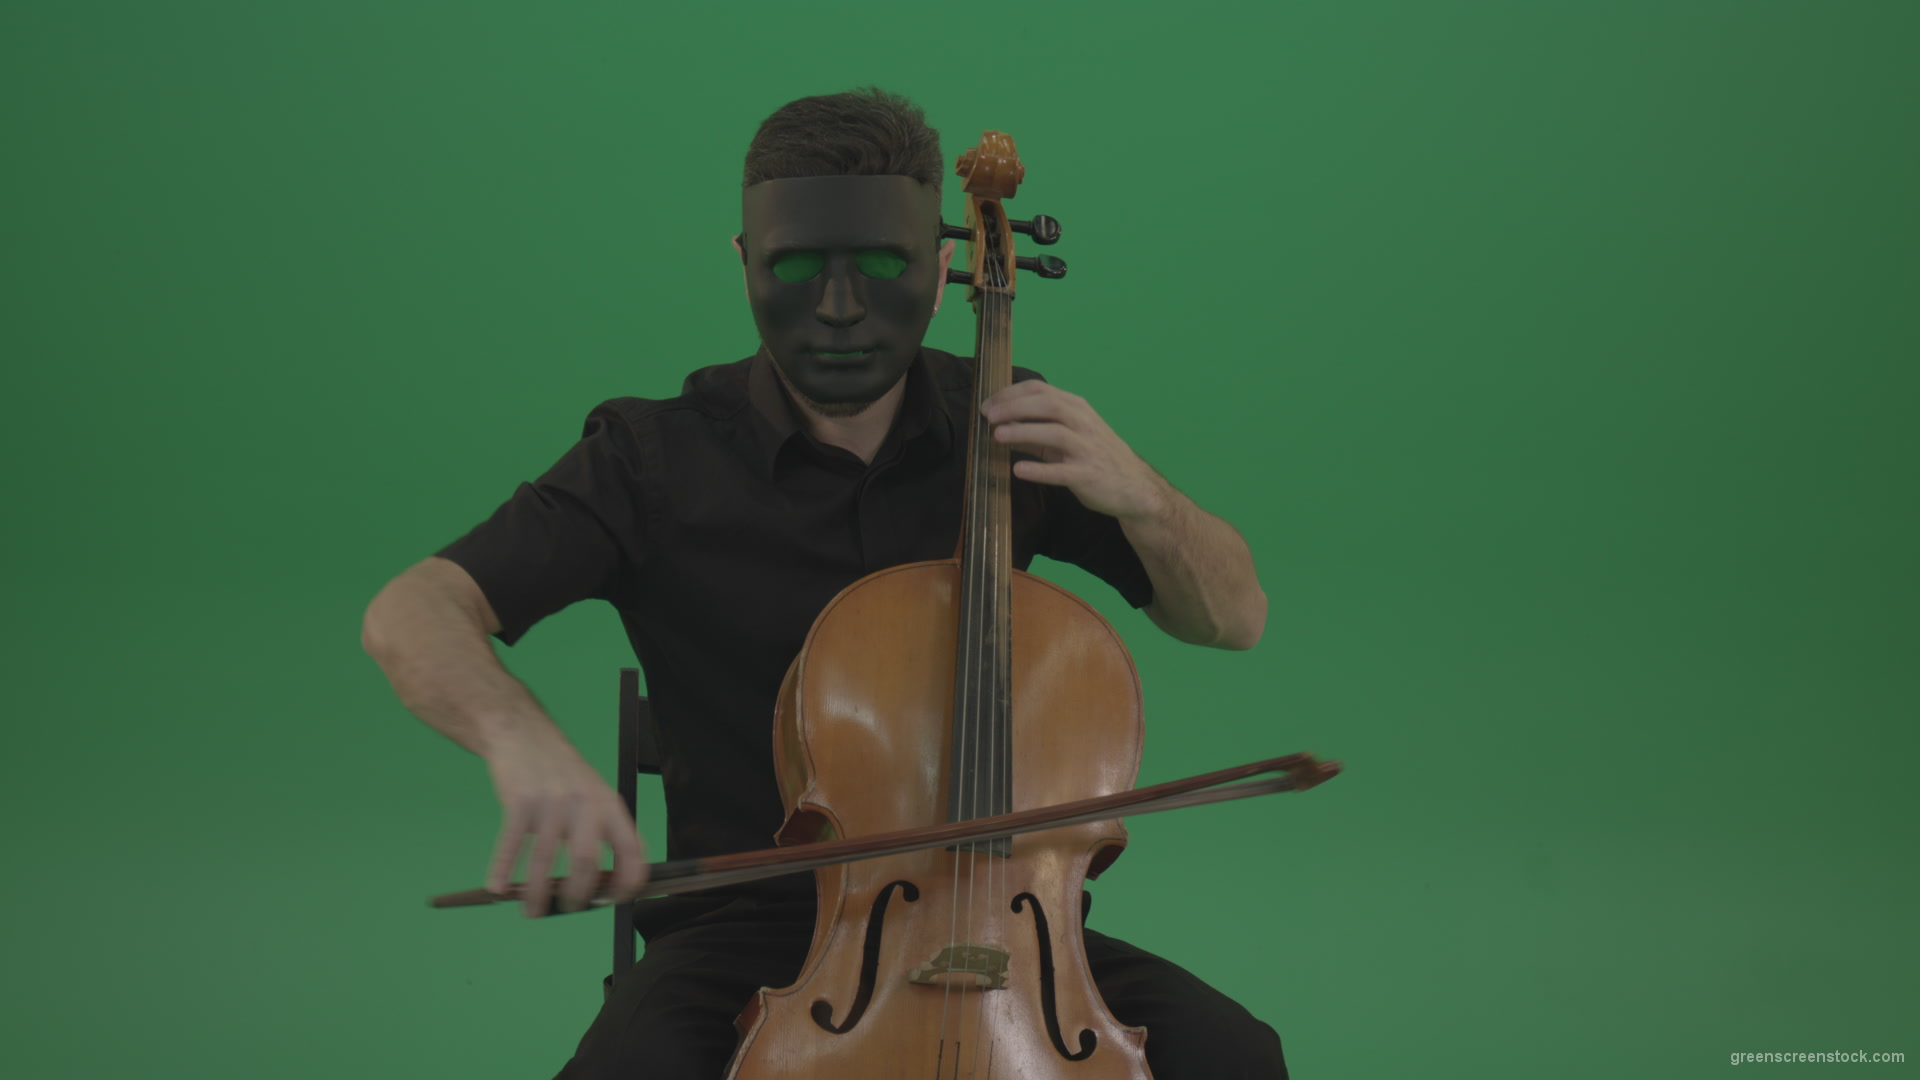 Gothic-Man-in-black-mask-playing-violoncello-cello-strings-music-instrument-isolated-on-green-screen_008 Green Screen Stock